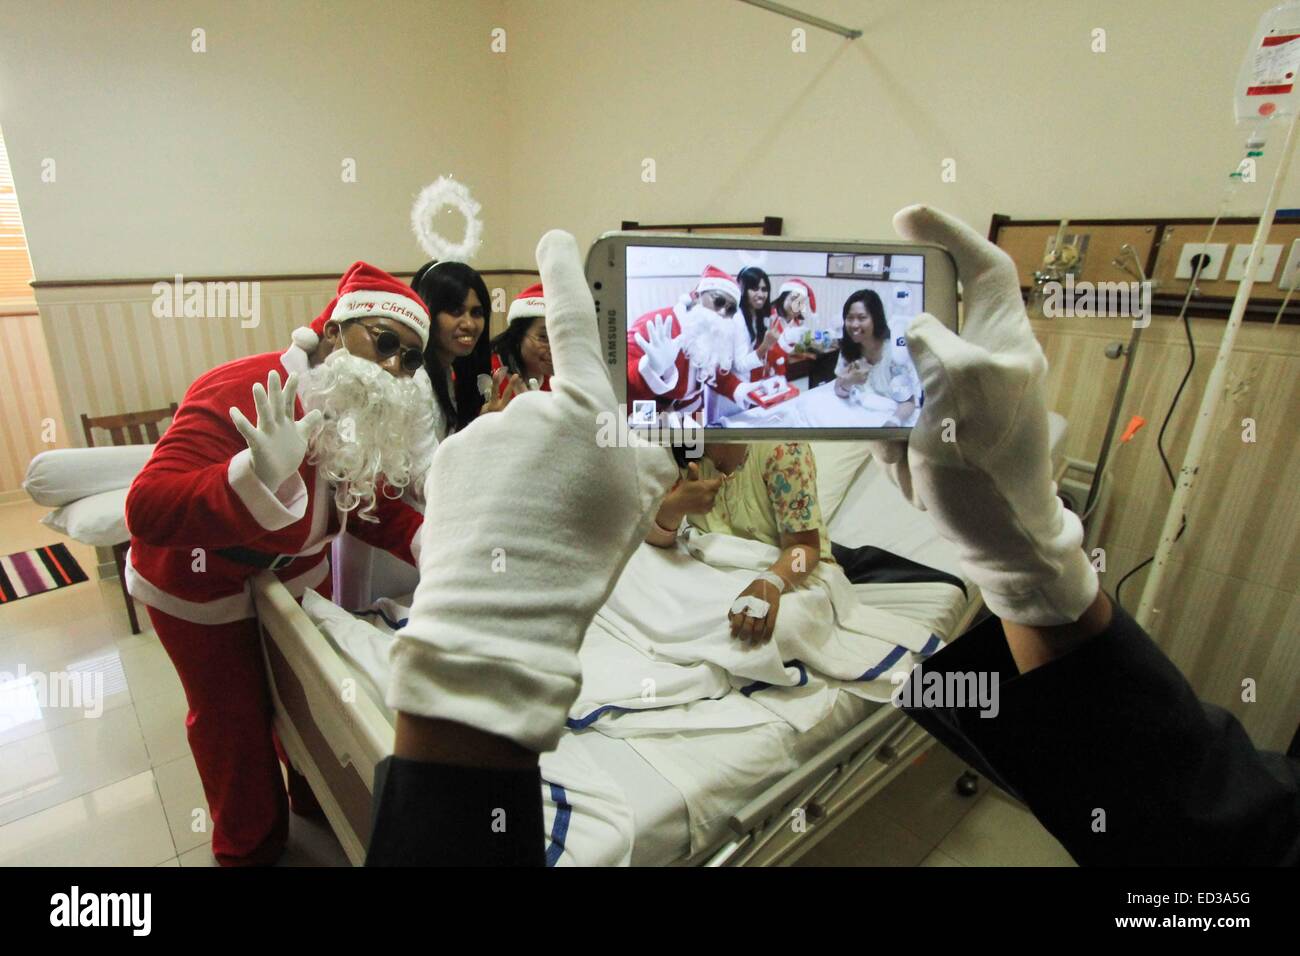 Semarang, Indonesia. 25th Dec, 2014. A man dressed as Santa Claus poses for photos with patients on Christmas at St. Elisabeth hospital in Semarang, Indonesia, Dec. 25, 2014. Credit:  Dhana Kencana/Xinhua/Alamy Live News Stock Photo